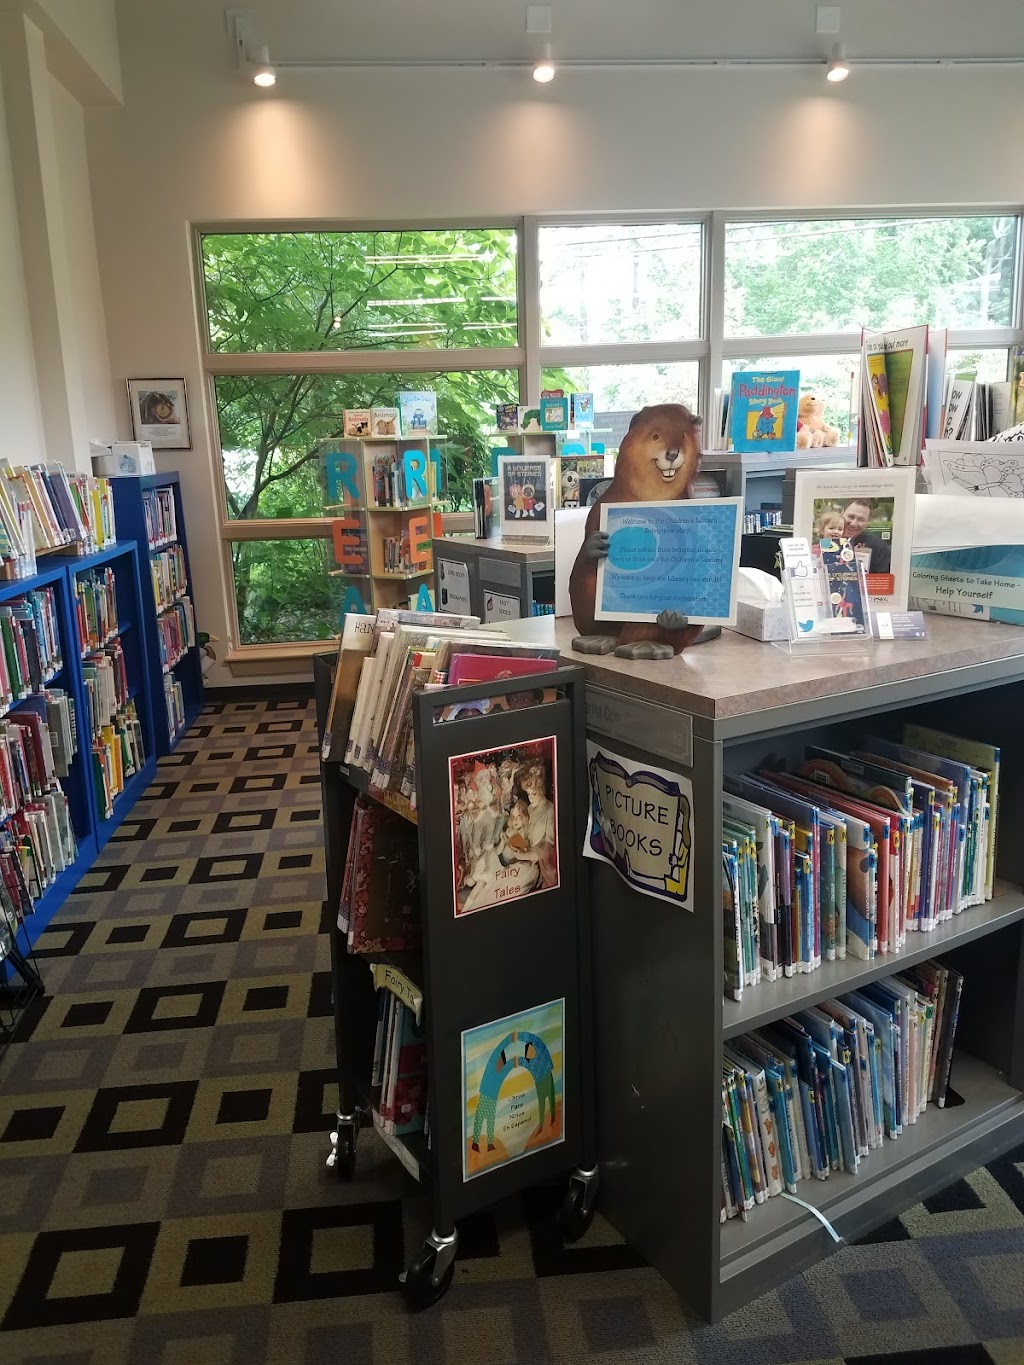 Franklin Twp. Public Library | 1584 Coles Mill Rd, Franklinville, NJ 08322 | Phone: (856) 694-2833